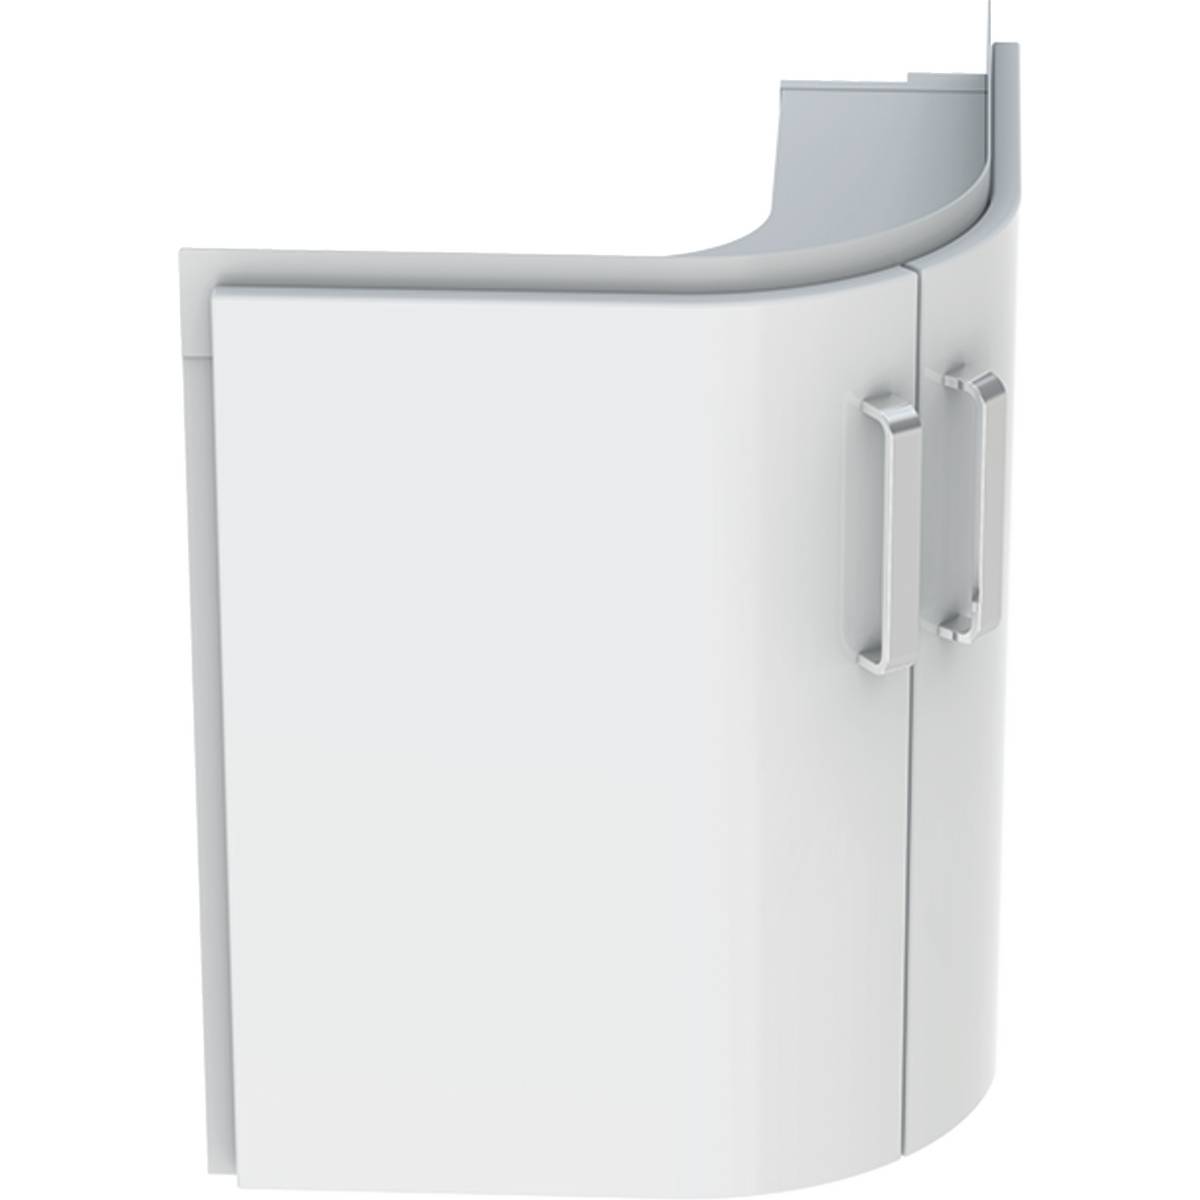 Selnova Compact Cabinet for Corner Washbasin, with Two Doors